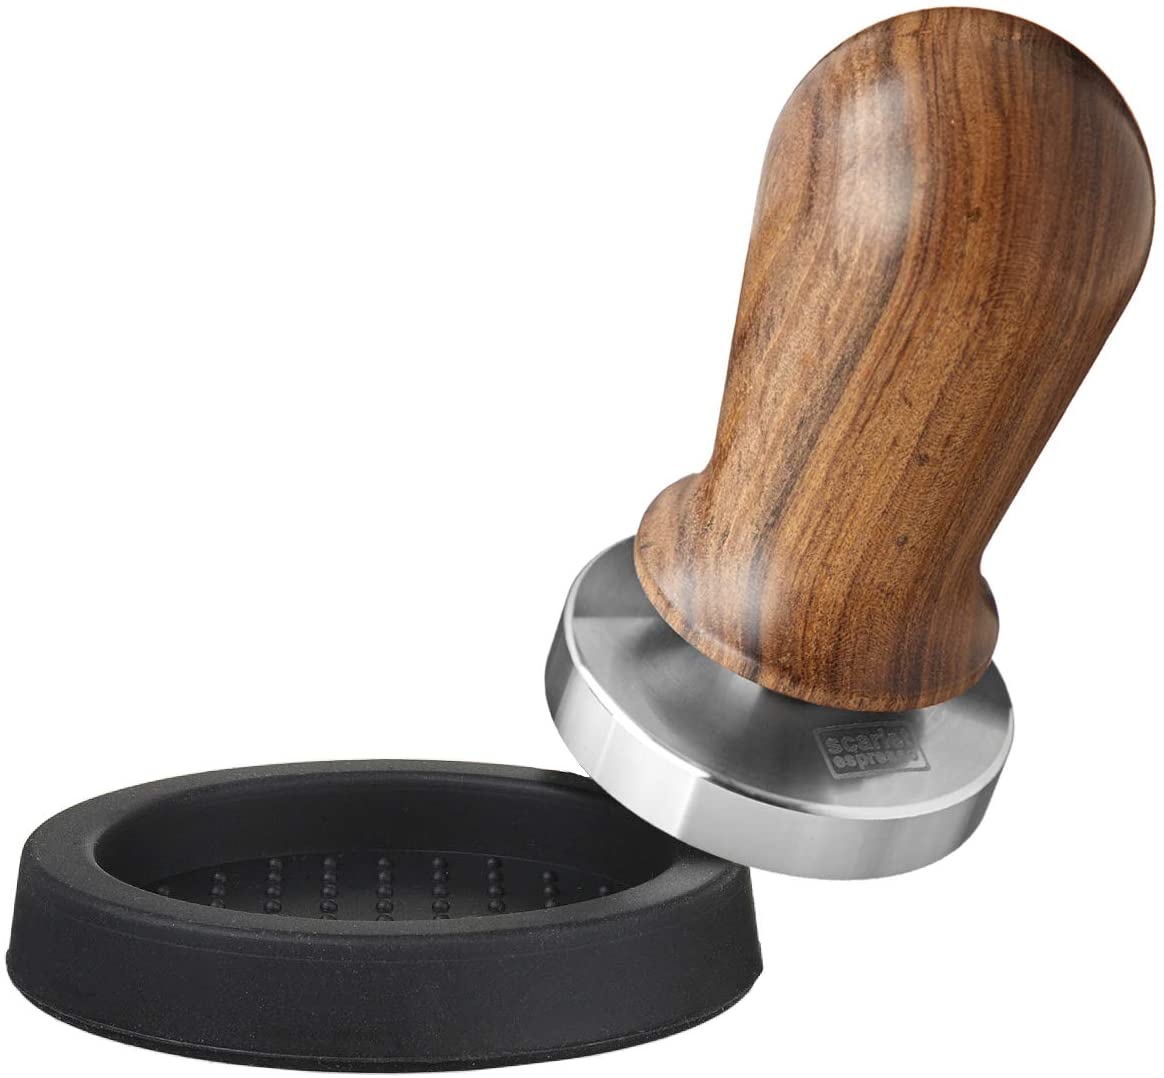 Scarlet Espresso Perfetto Tamper For Barista; Calibrated To 35 Lbs Contact 